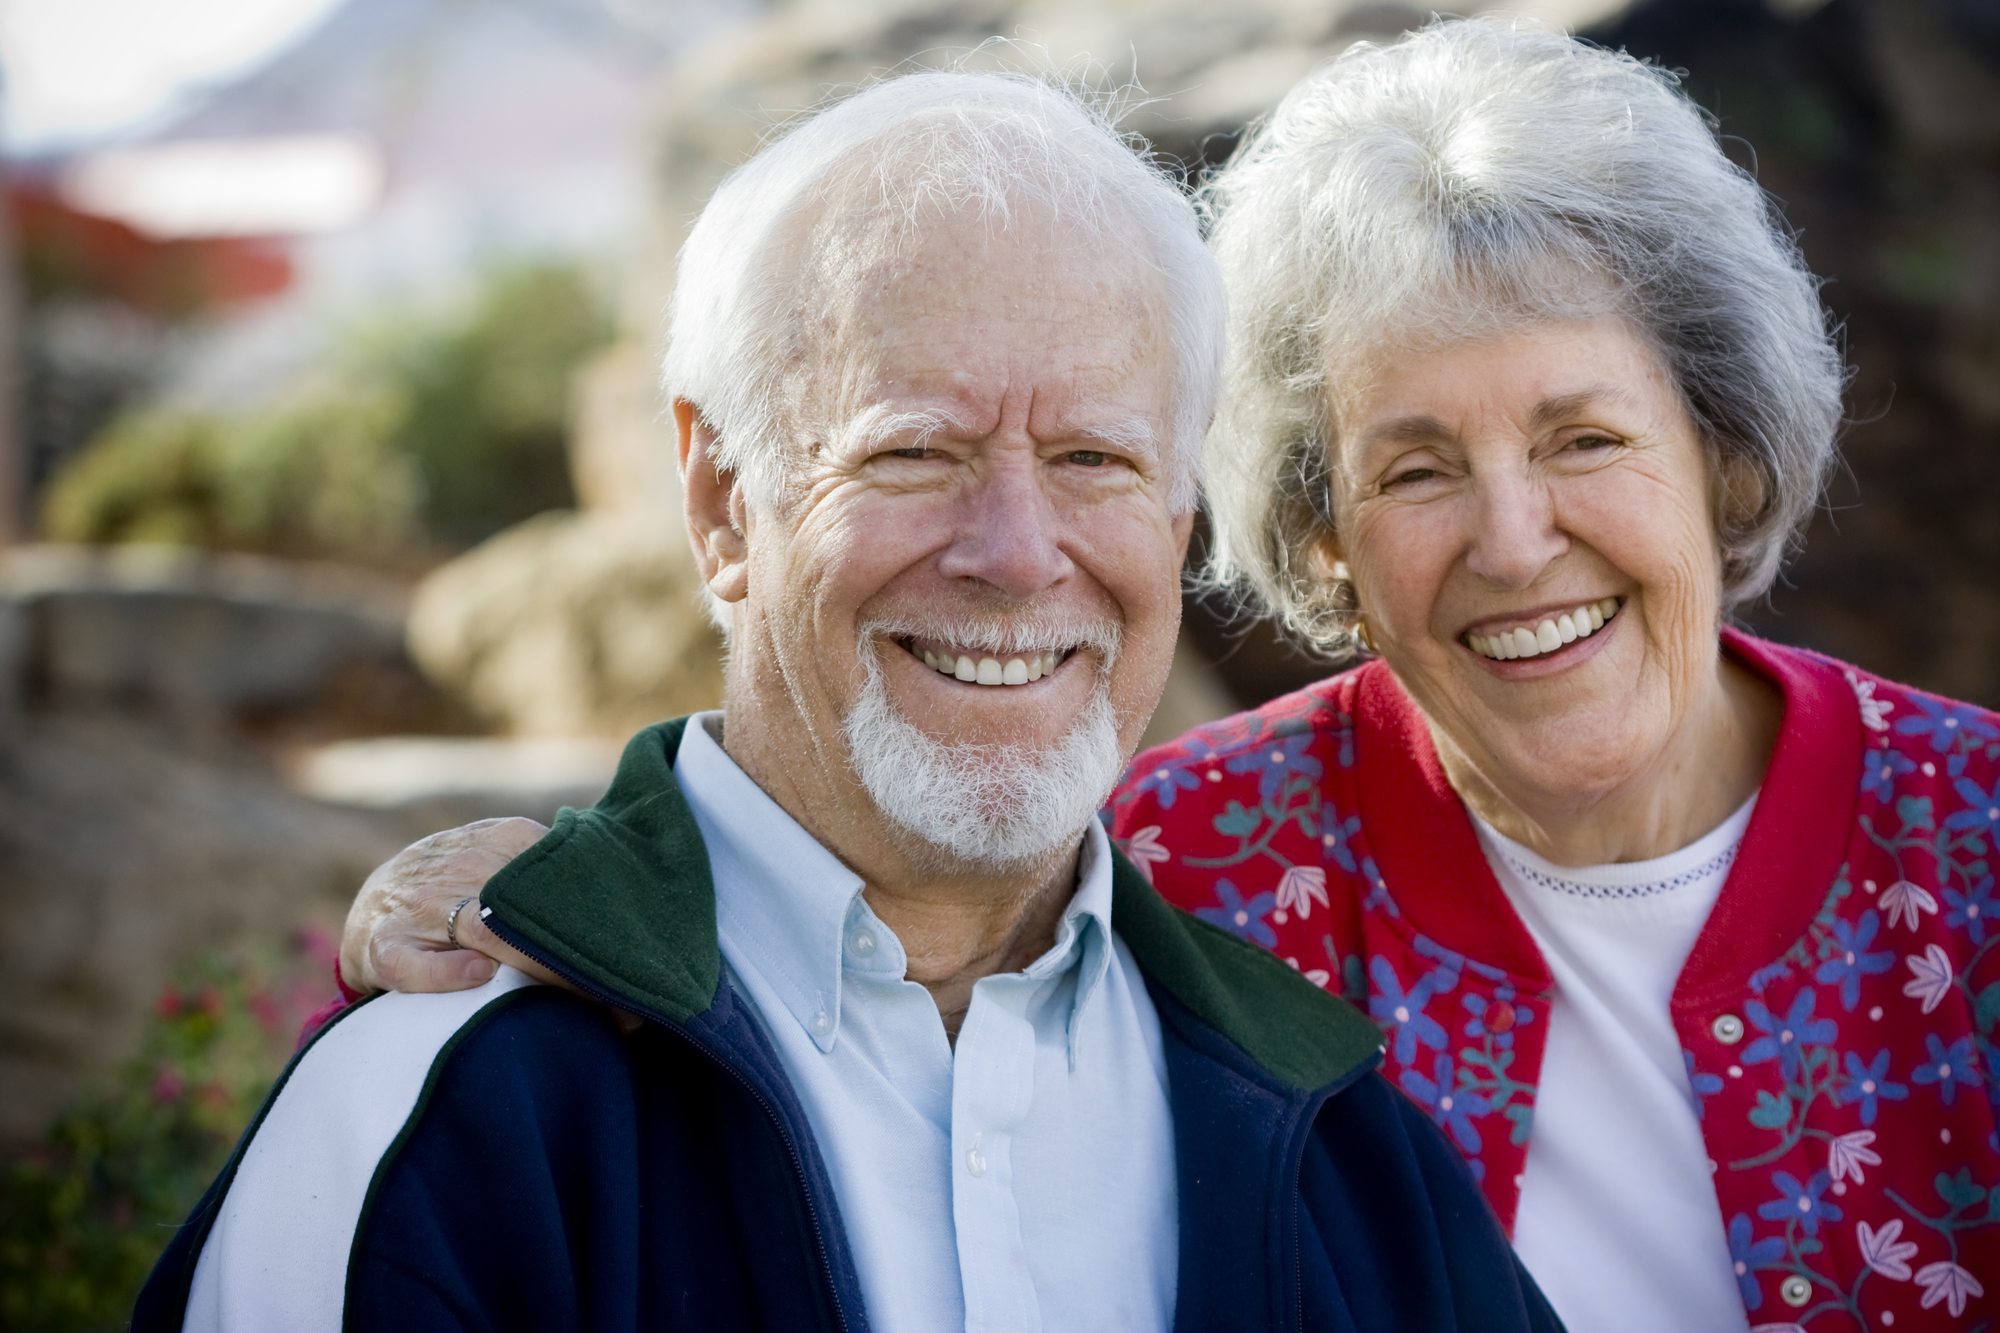 long-term care financial planning in Texas